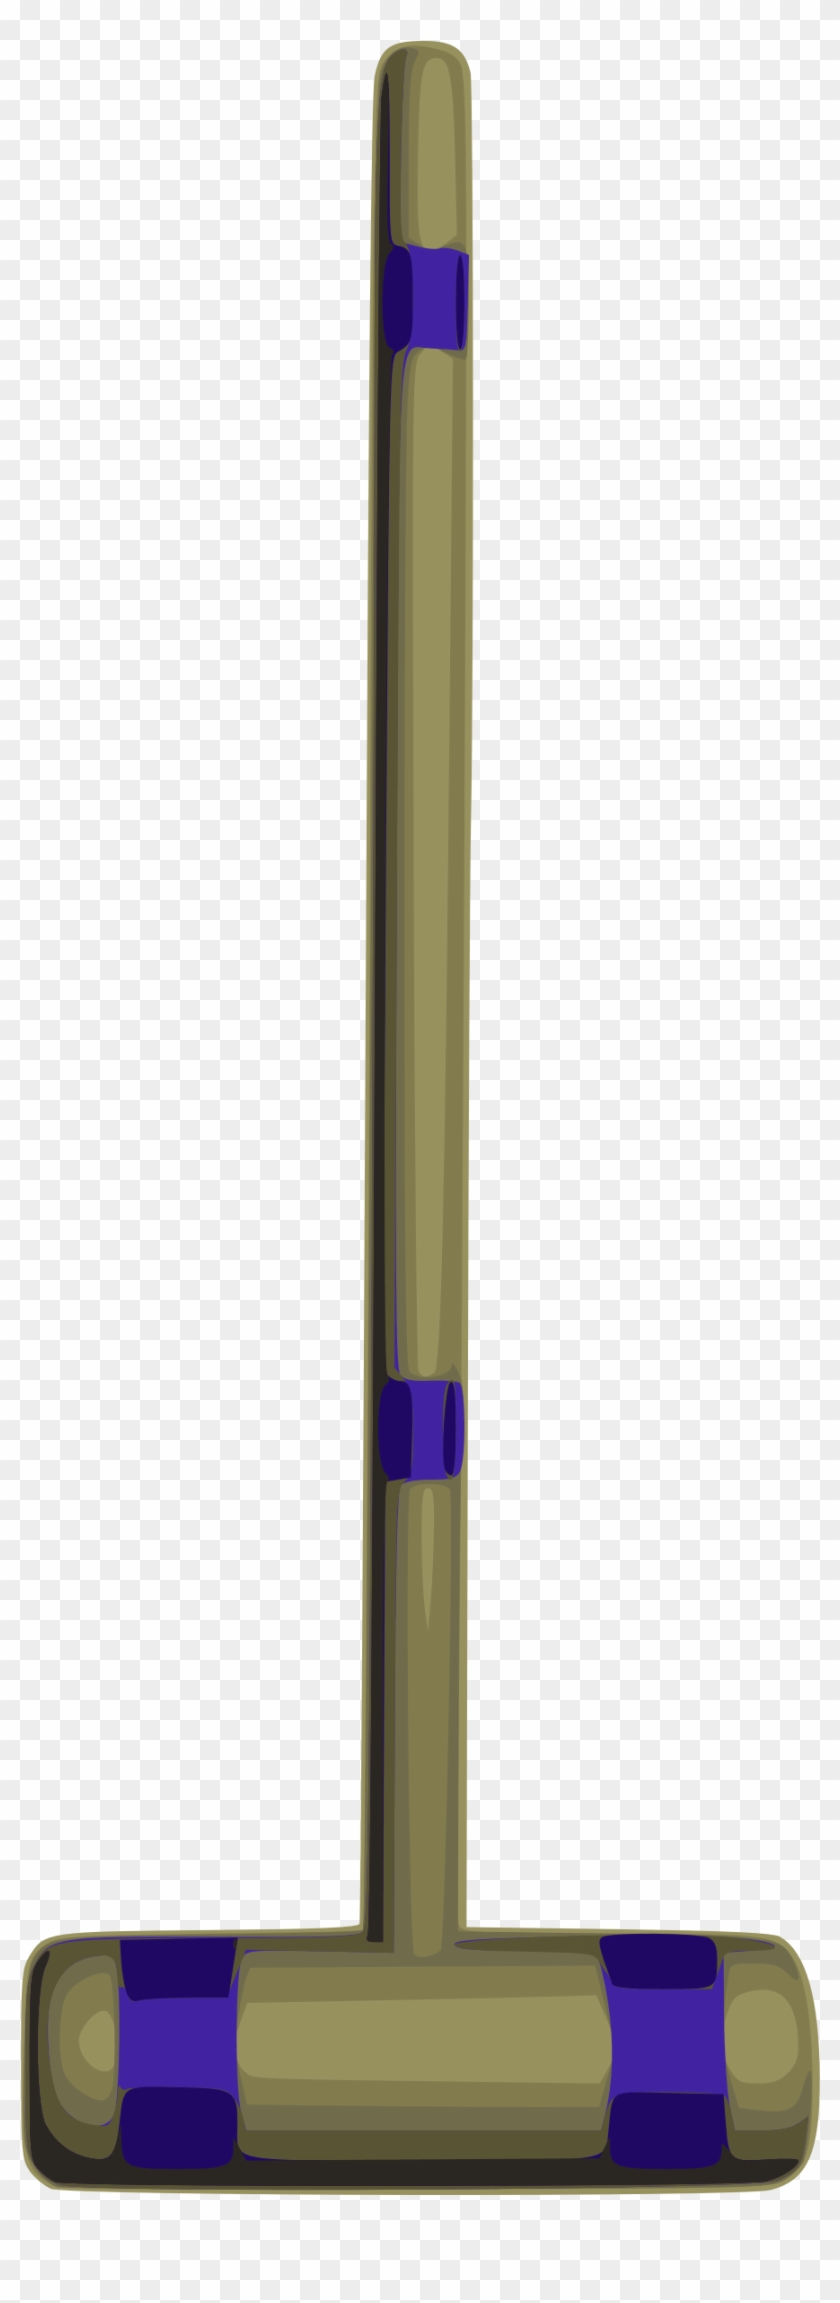 Other Clipart - Croquet Mallet #835460